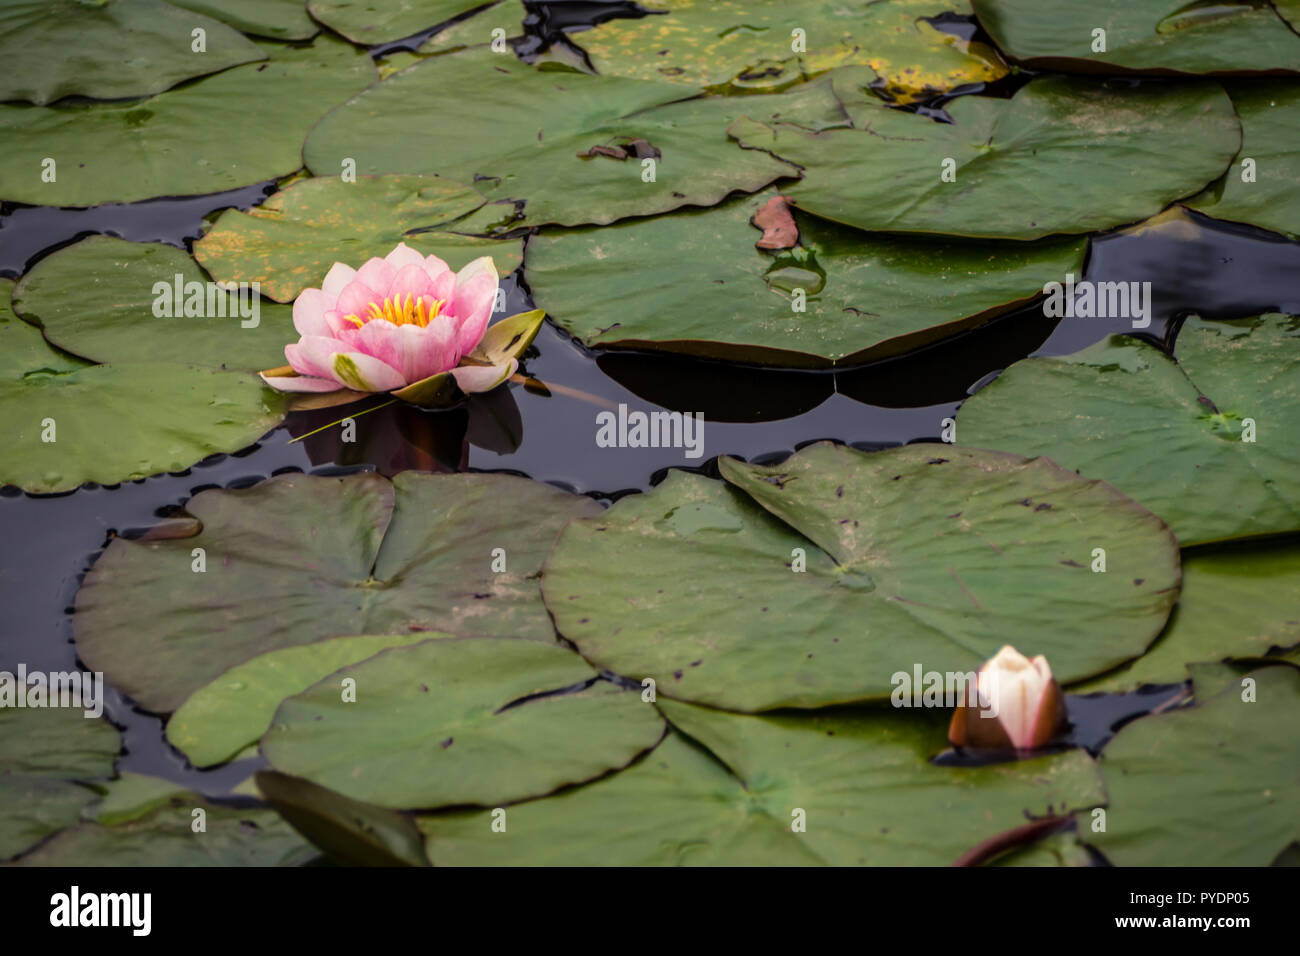 Water lilly flower detail with other flower bud and the leaves in the water Stock Photo